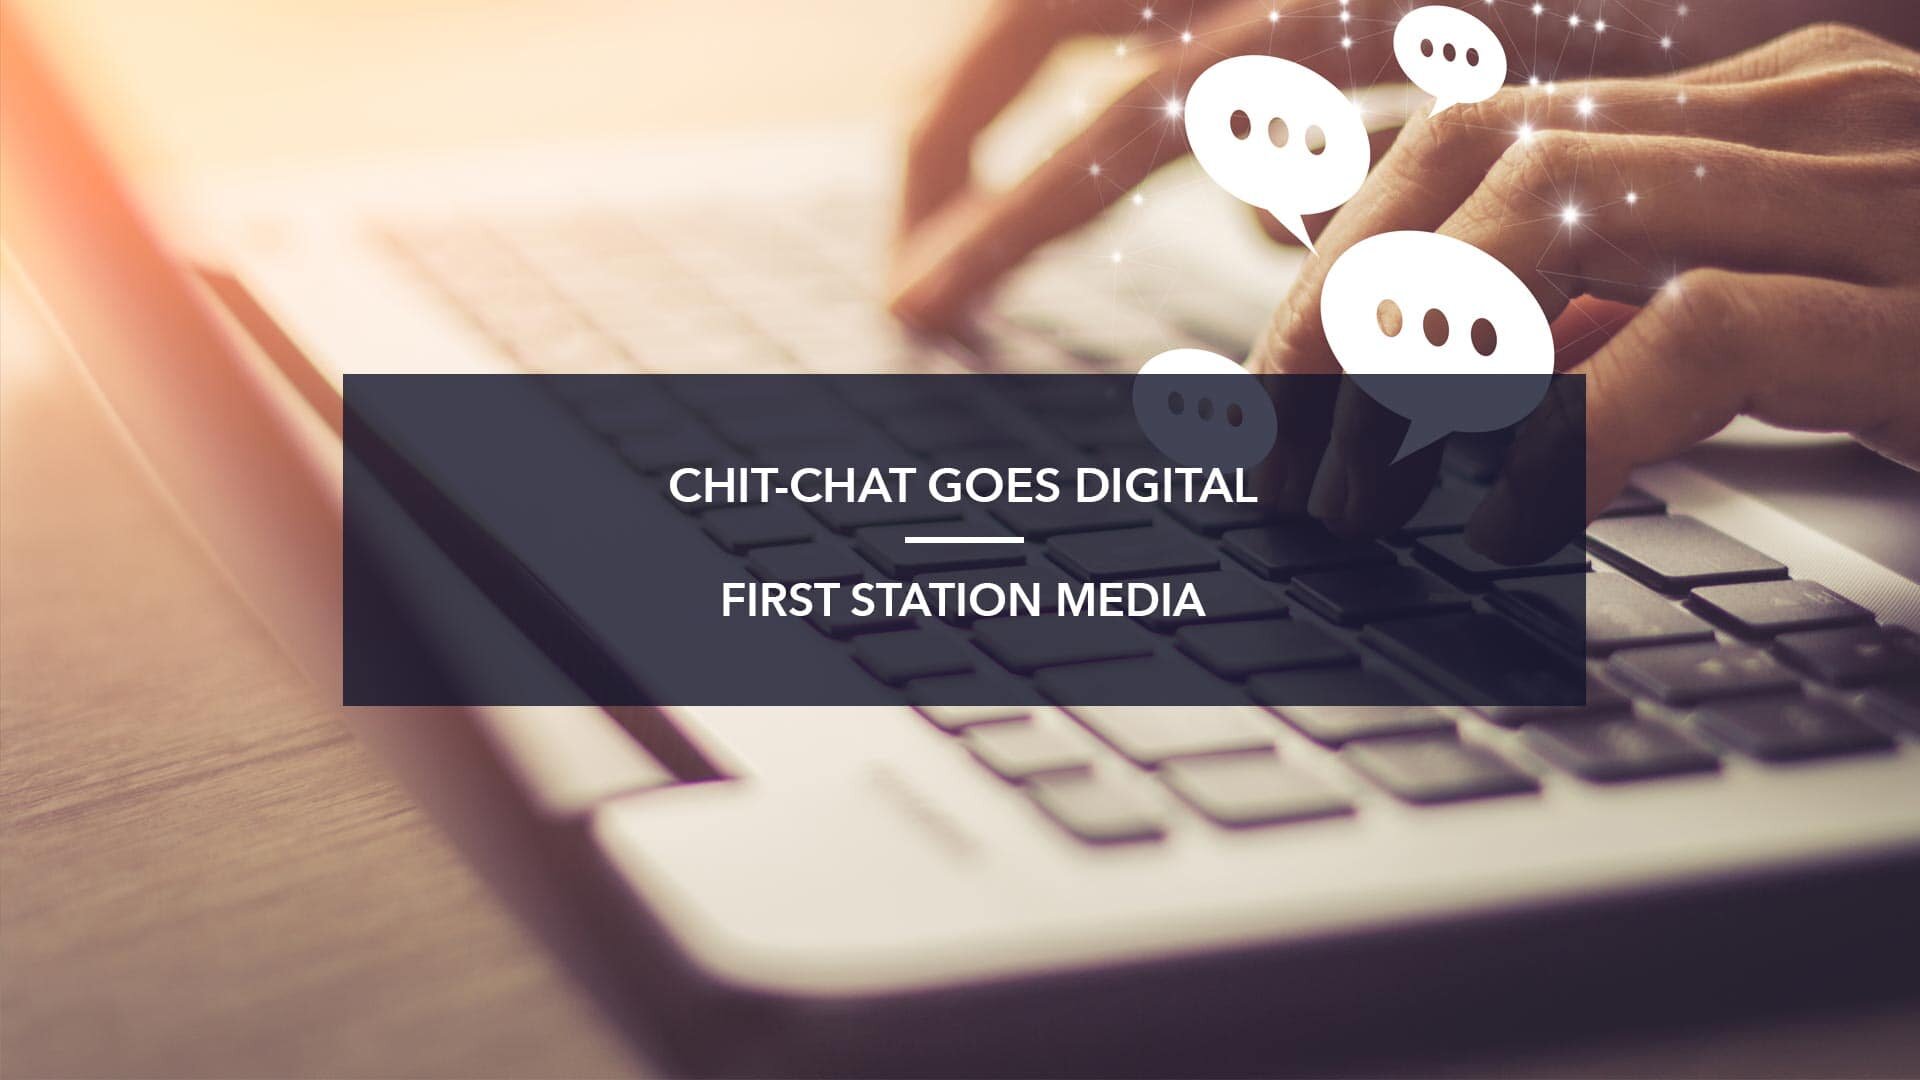 CHIT-CHAT GOES DIGITAL